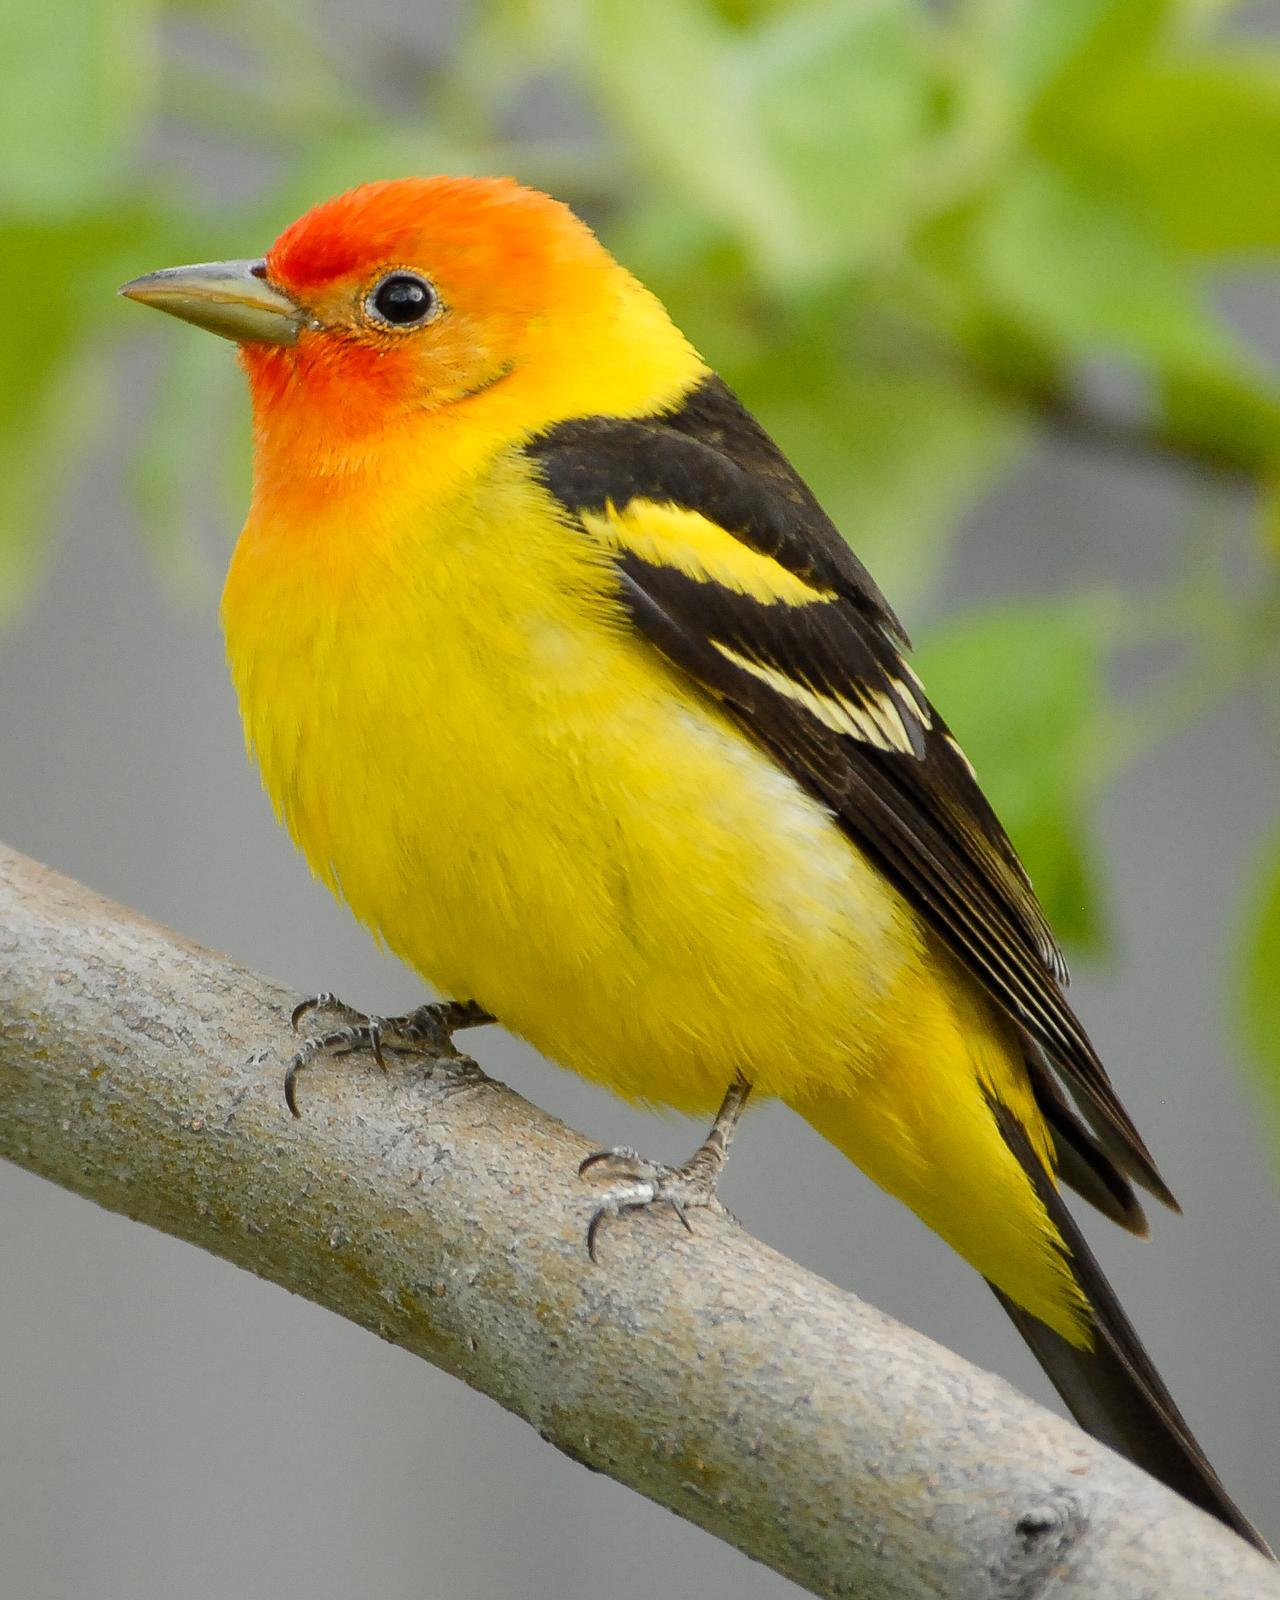 Western Tanager Photo by Mike Fish